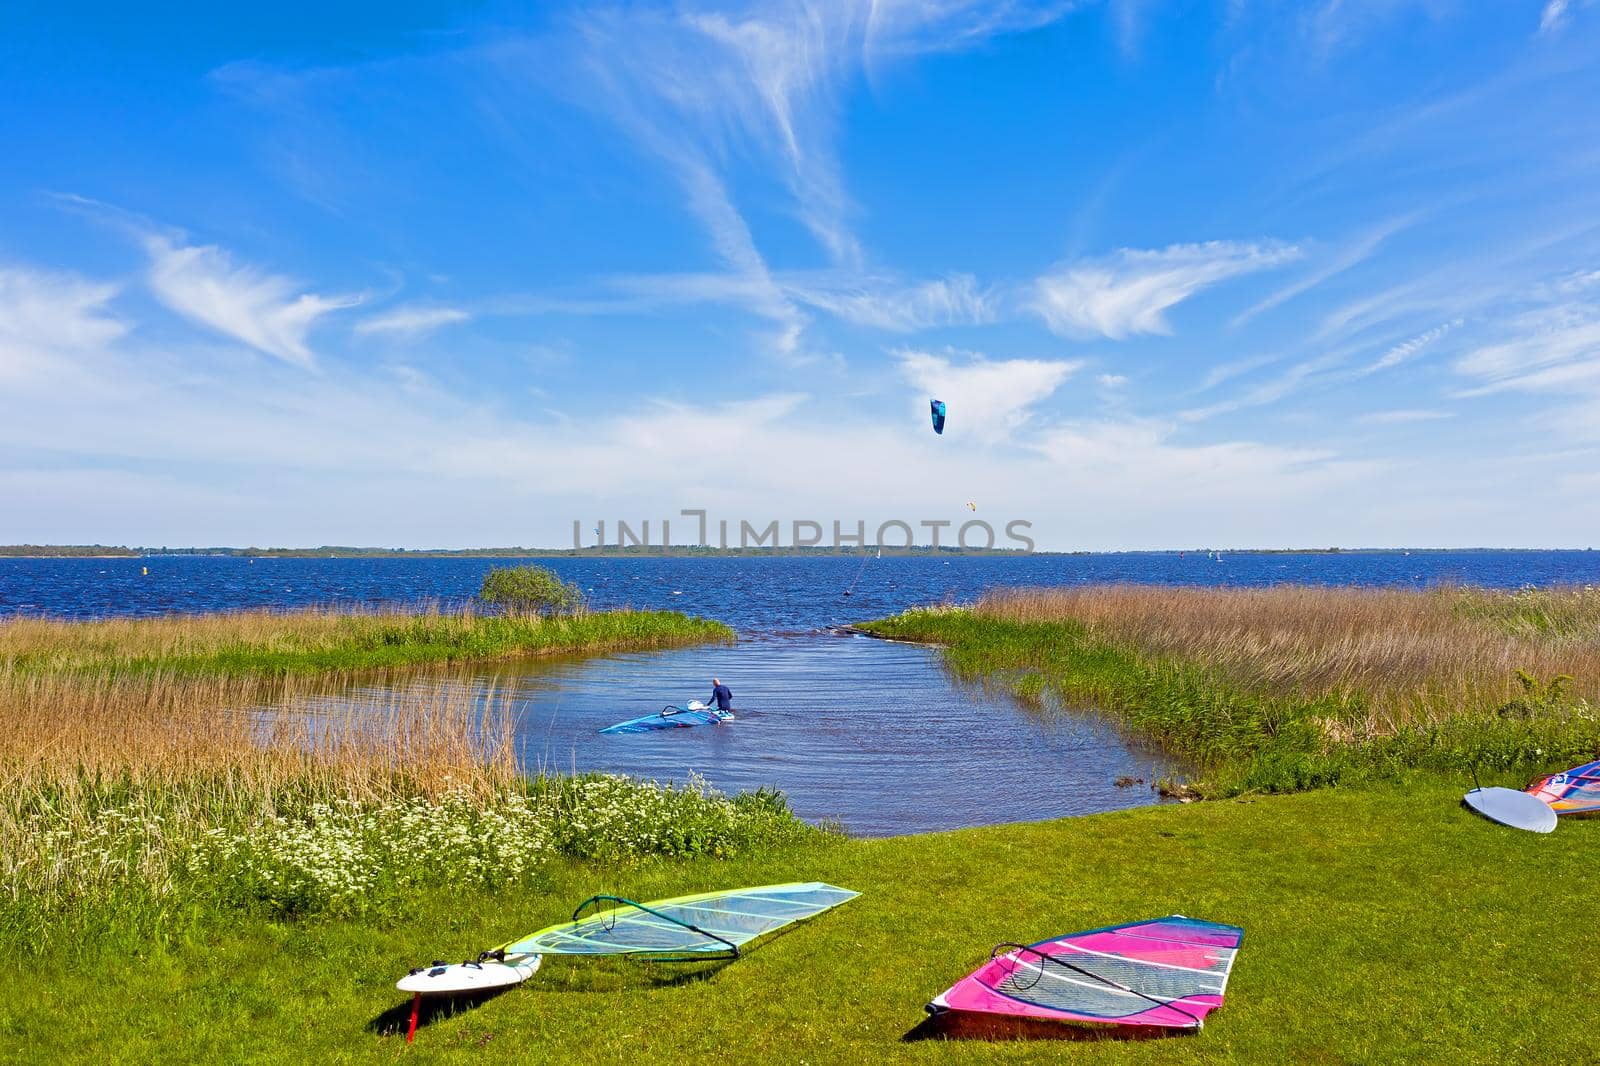 Watersports at the Lauwersmeer in the Netherlands